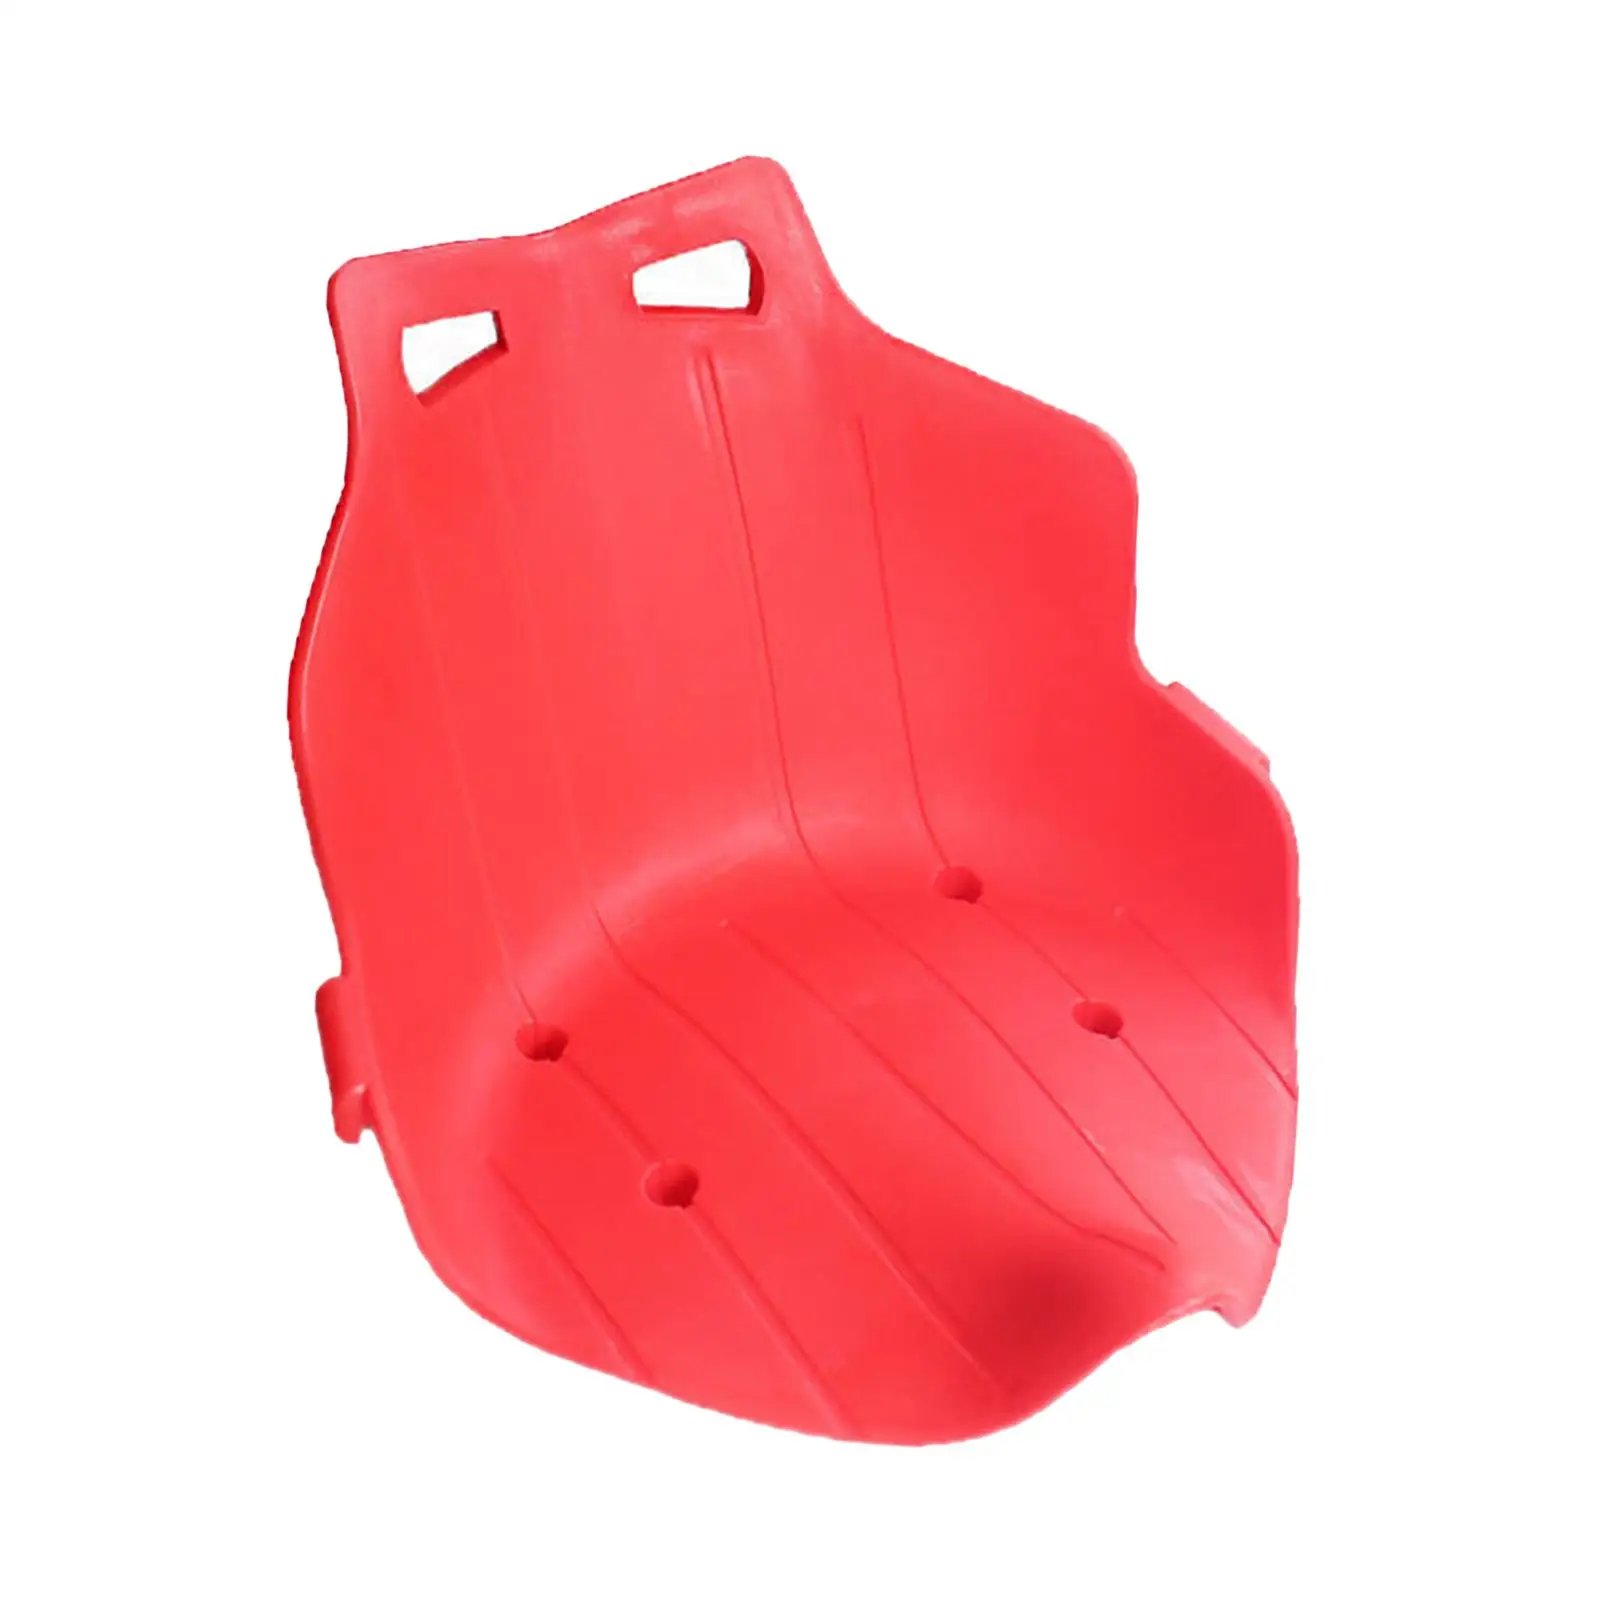 Kids Seat Attachment DIY Durable Go Karts Seat Saddle Kart Car Saddle Replacement Parts for Racing Cart Accessories